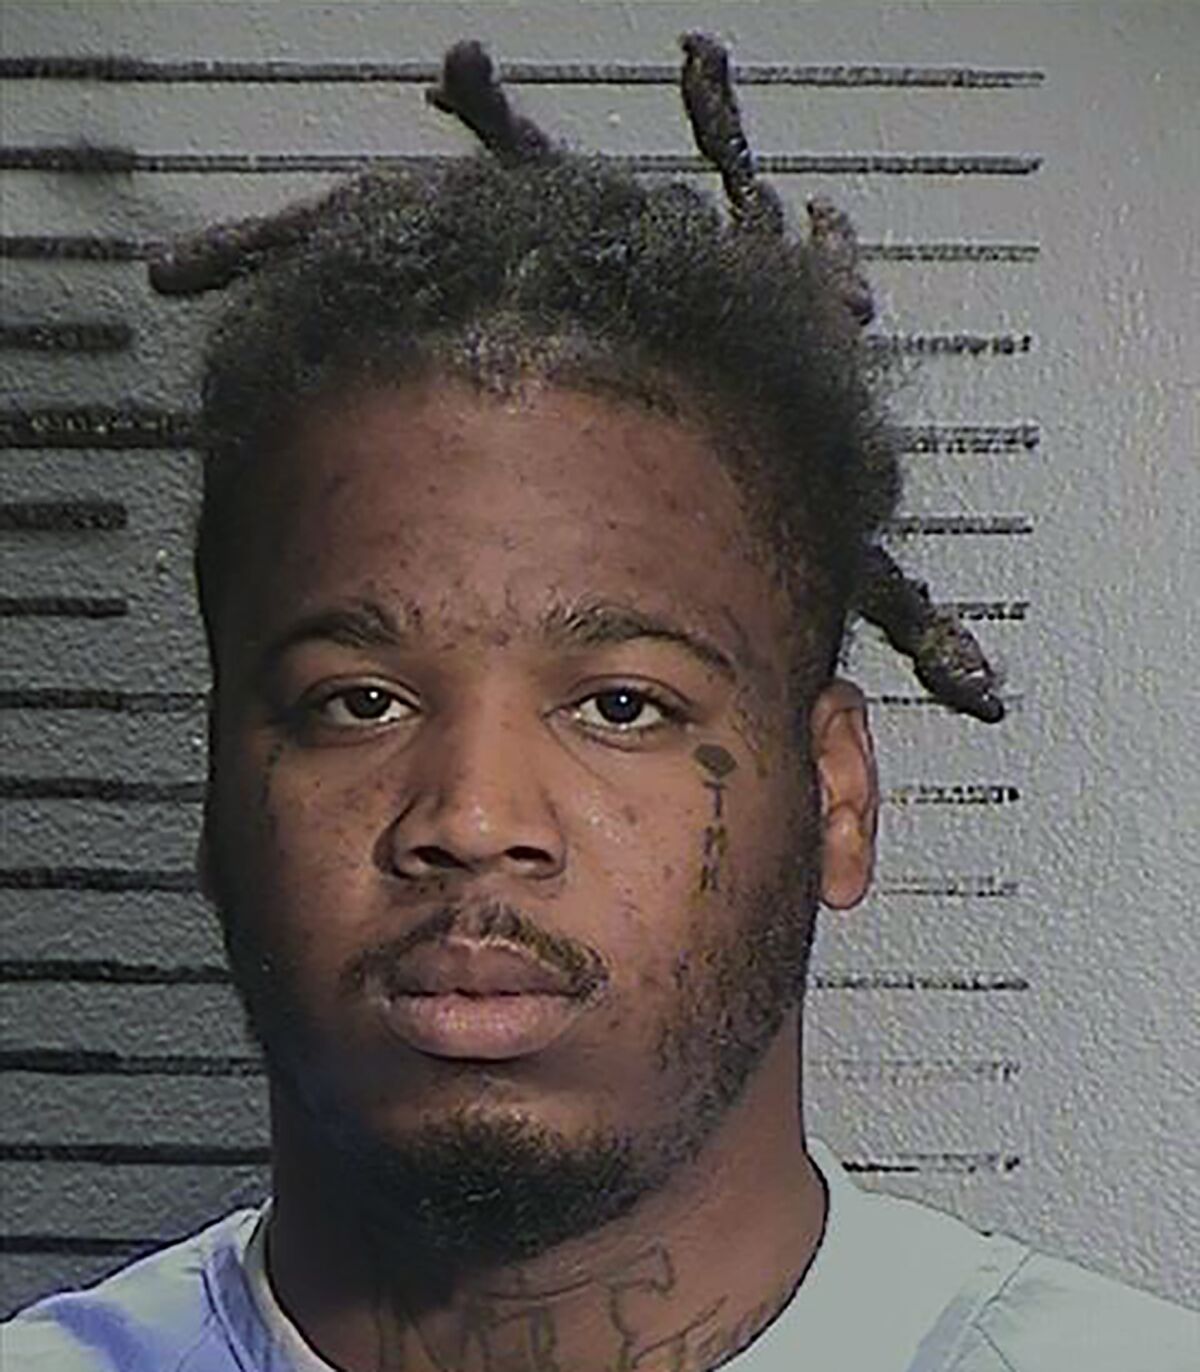 Smiley Martin is seen in this Feb. 6, 2022, booking photo.